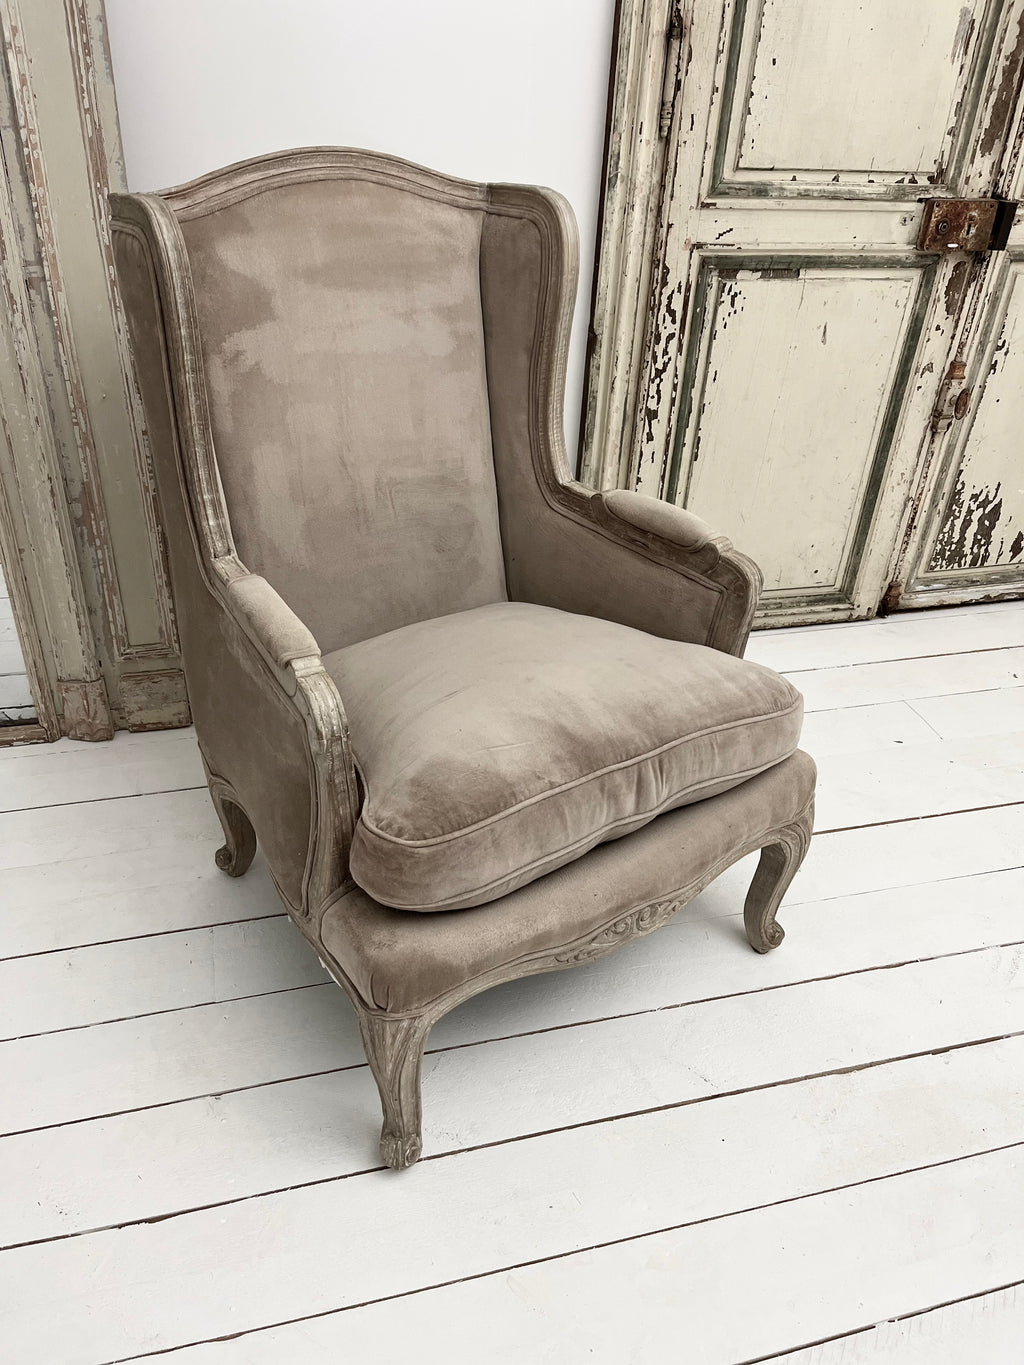 Armchair made by Cox & Cox